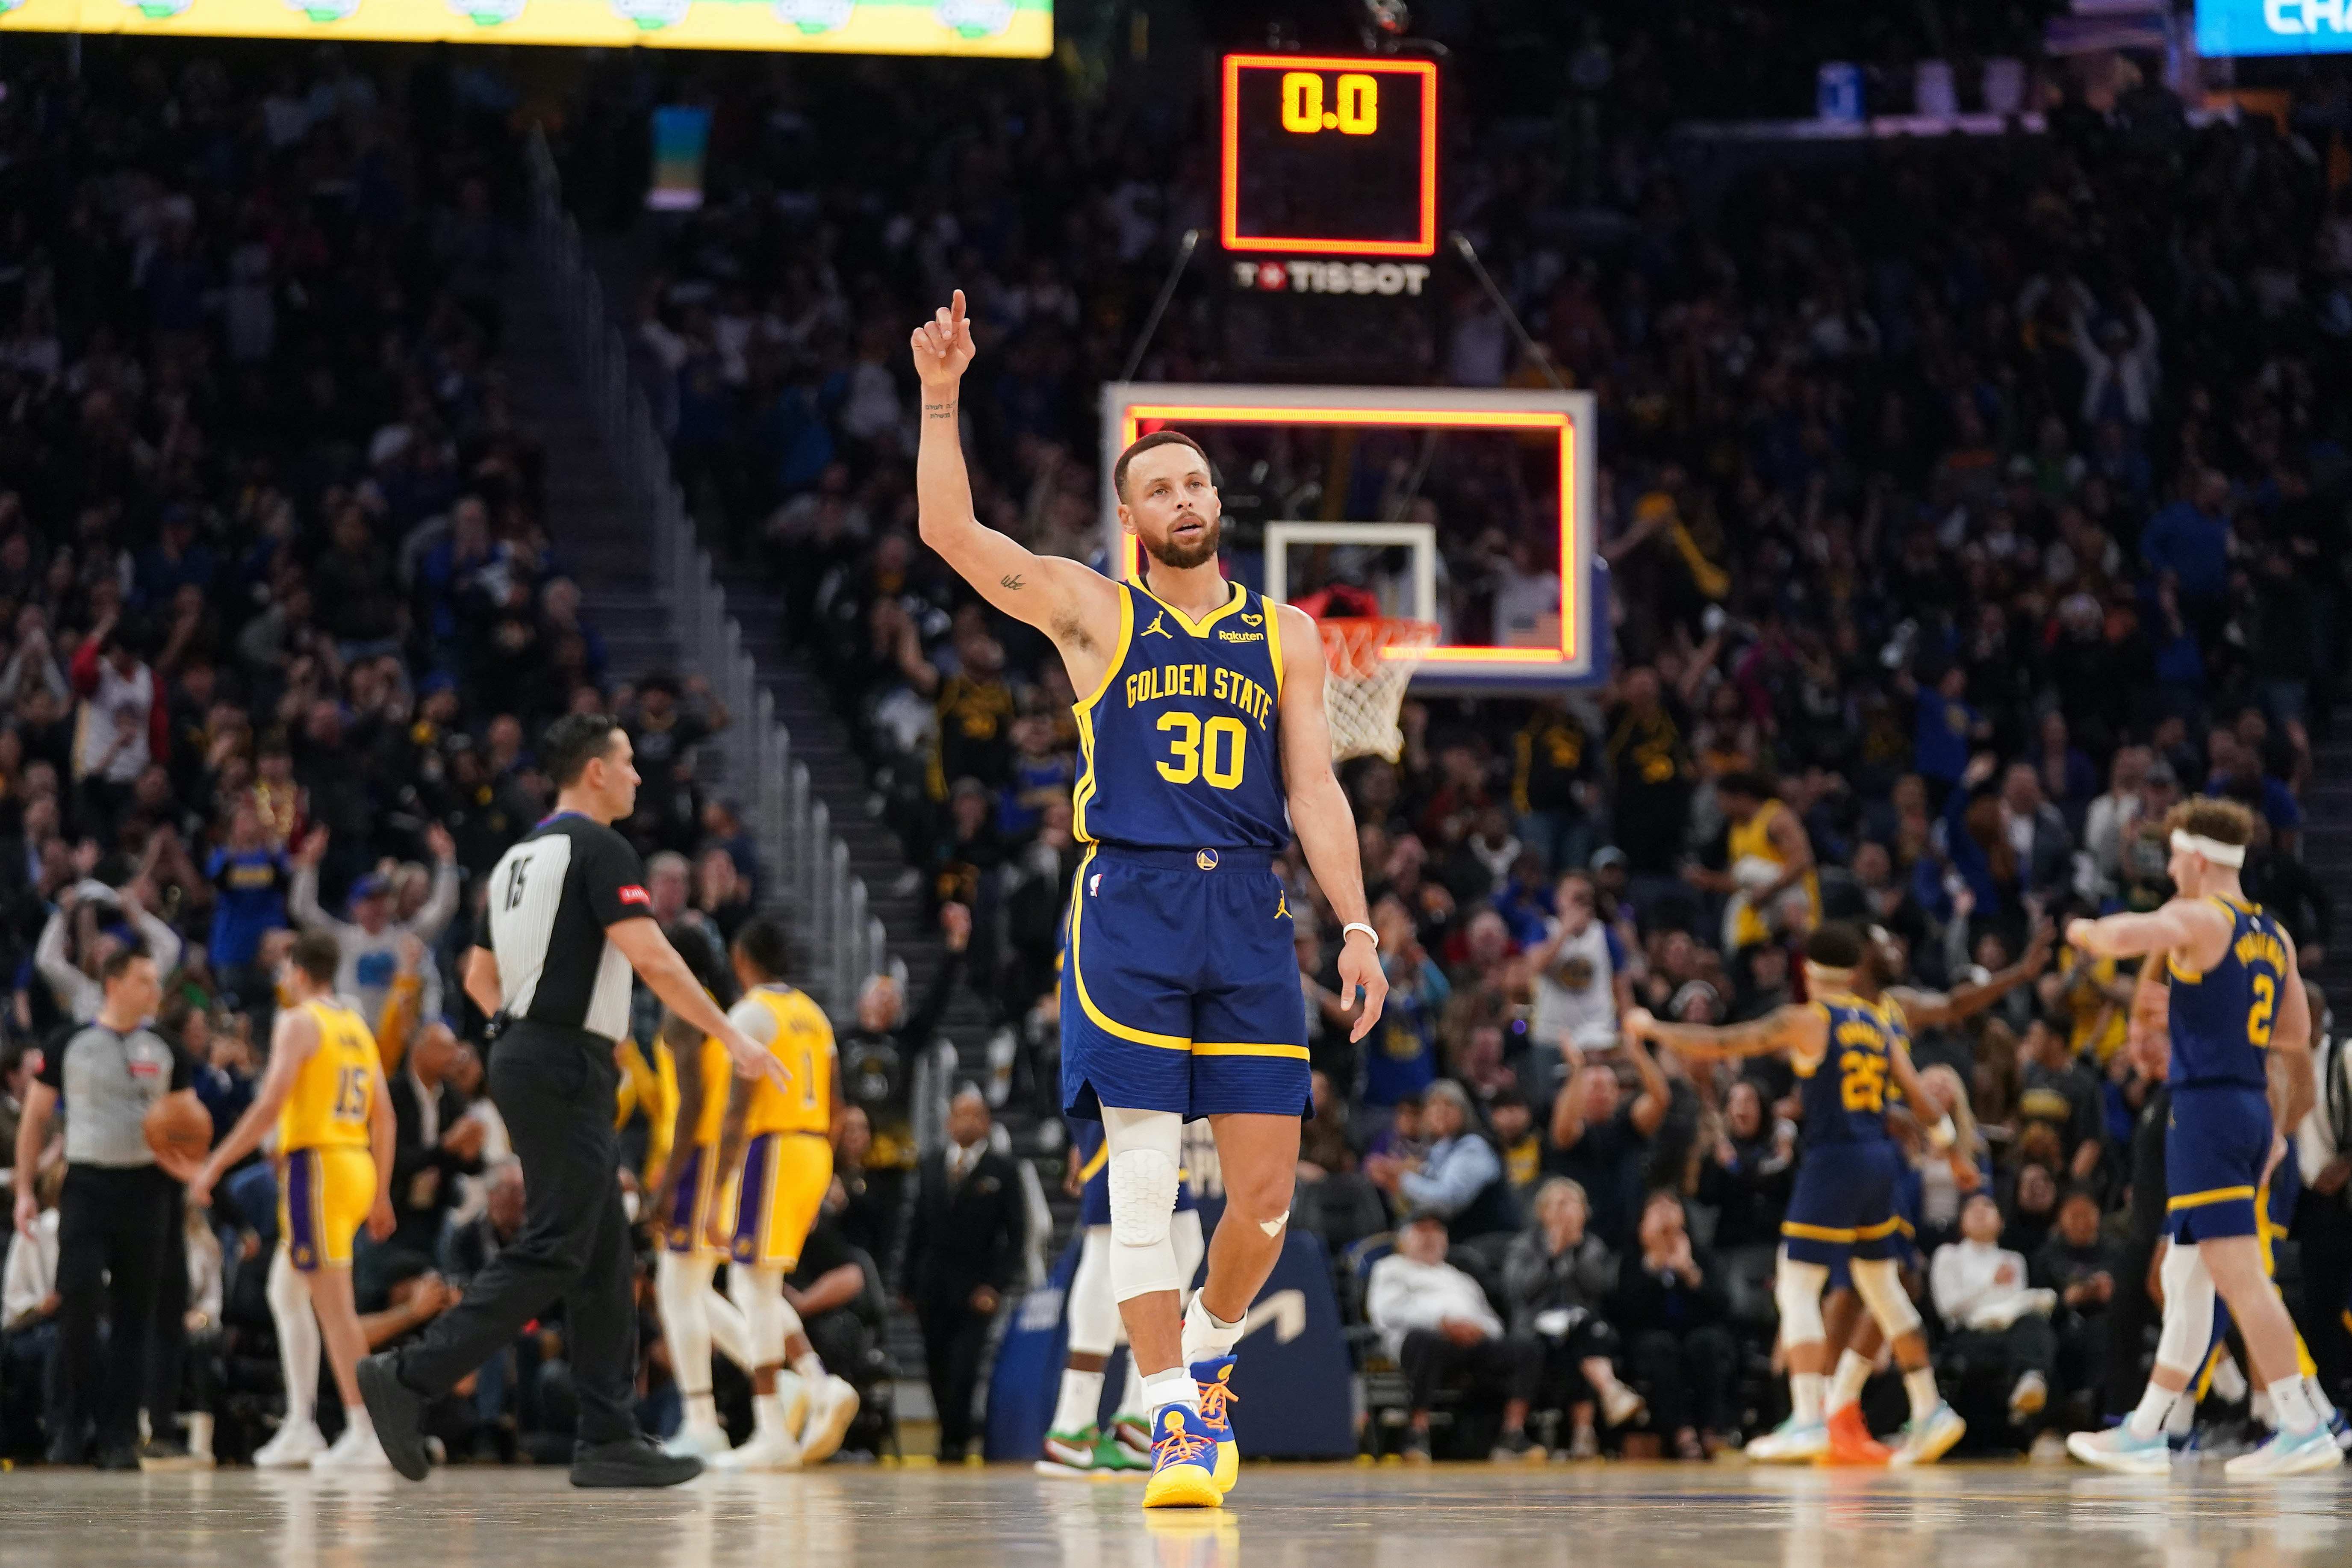 NBA: Stephen Curry, Warriors outdistance short-handed Lakers